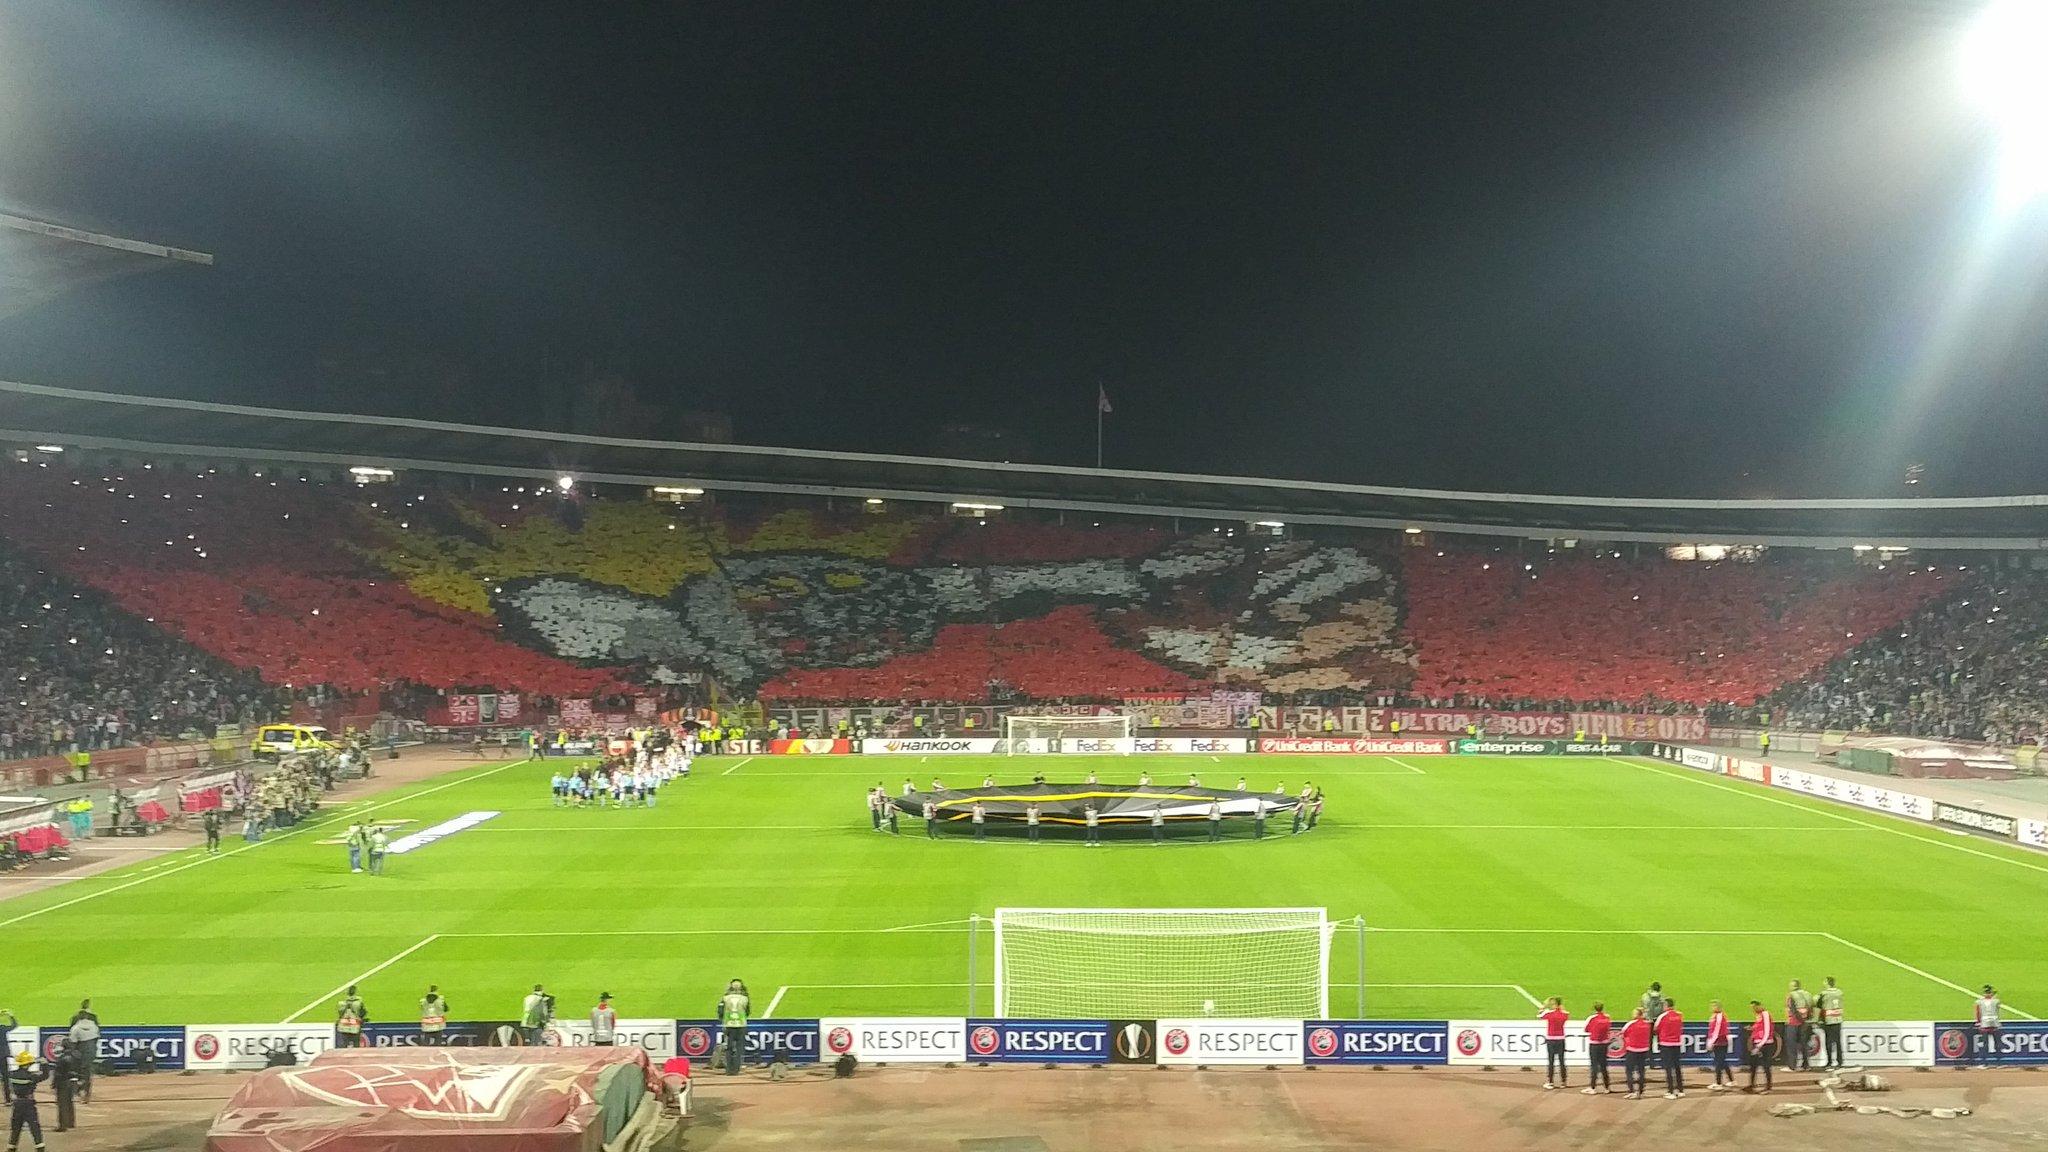 Interesting choreography before the match by Red Star fans :)